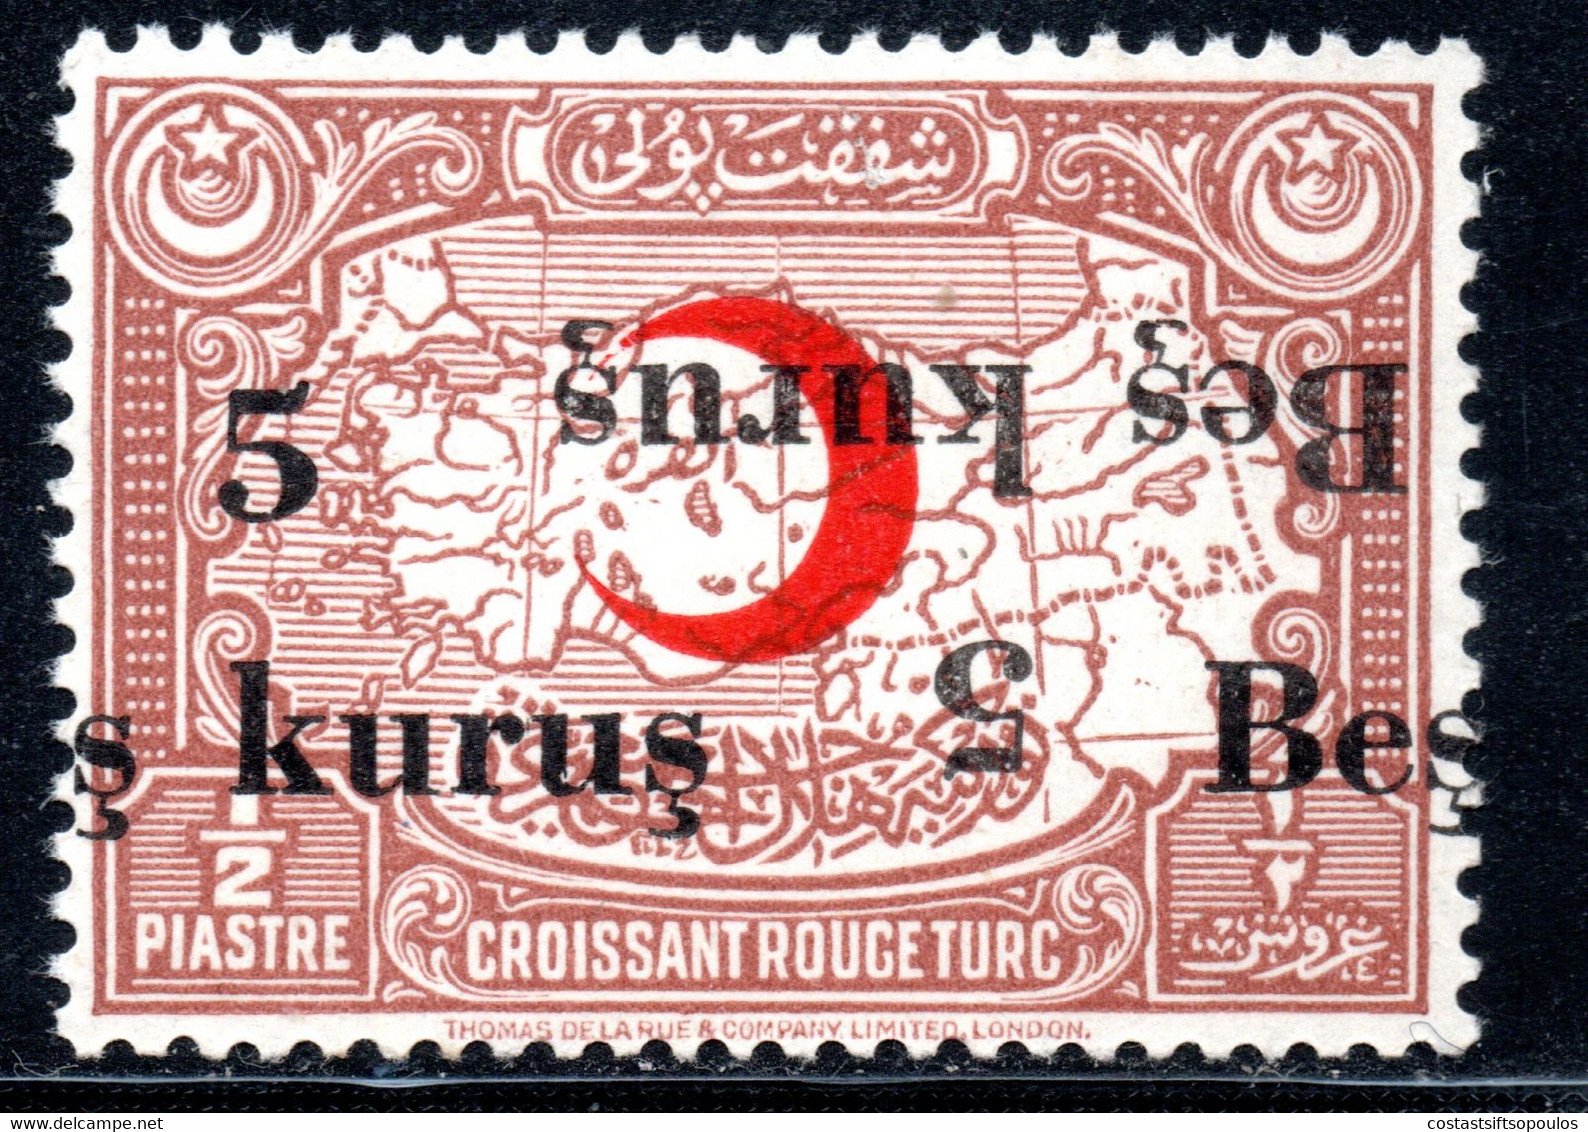 1012.TURKEY,1933-1934 RED CRESCENT,MAP MICH.25,SC.RA 22 DOUBLE SURCHARGE ONE INVERTED,MNH,UNRECORDED - Ungebraucht